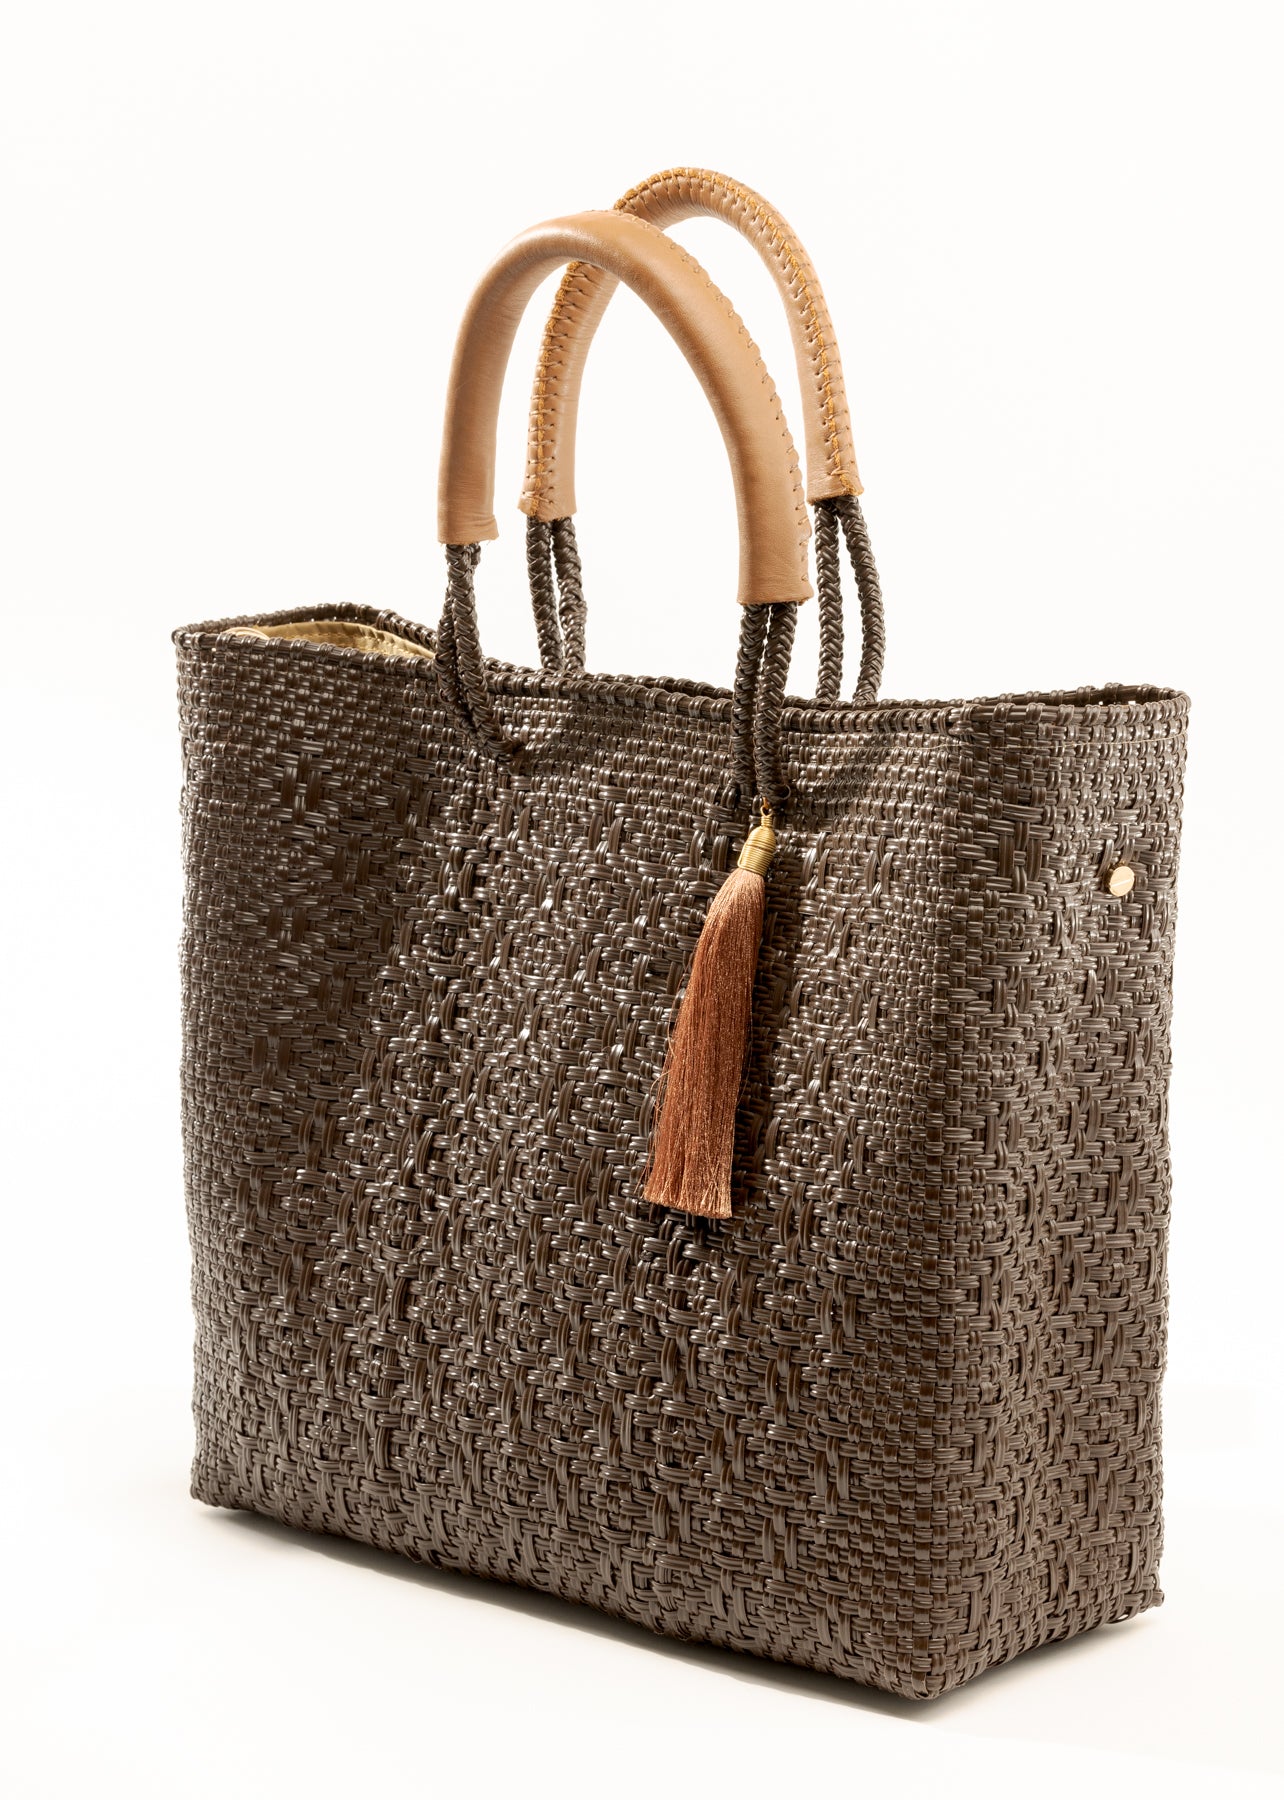 Side angle of brown and tan woven handbag made from recycled plastics featuring tan leather handles and tassel detail